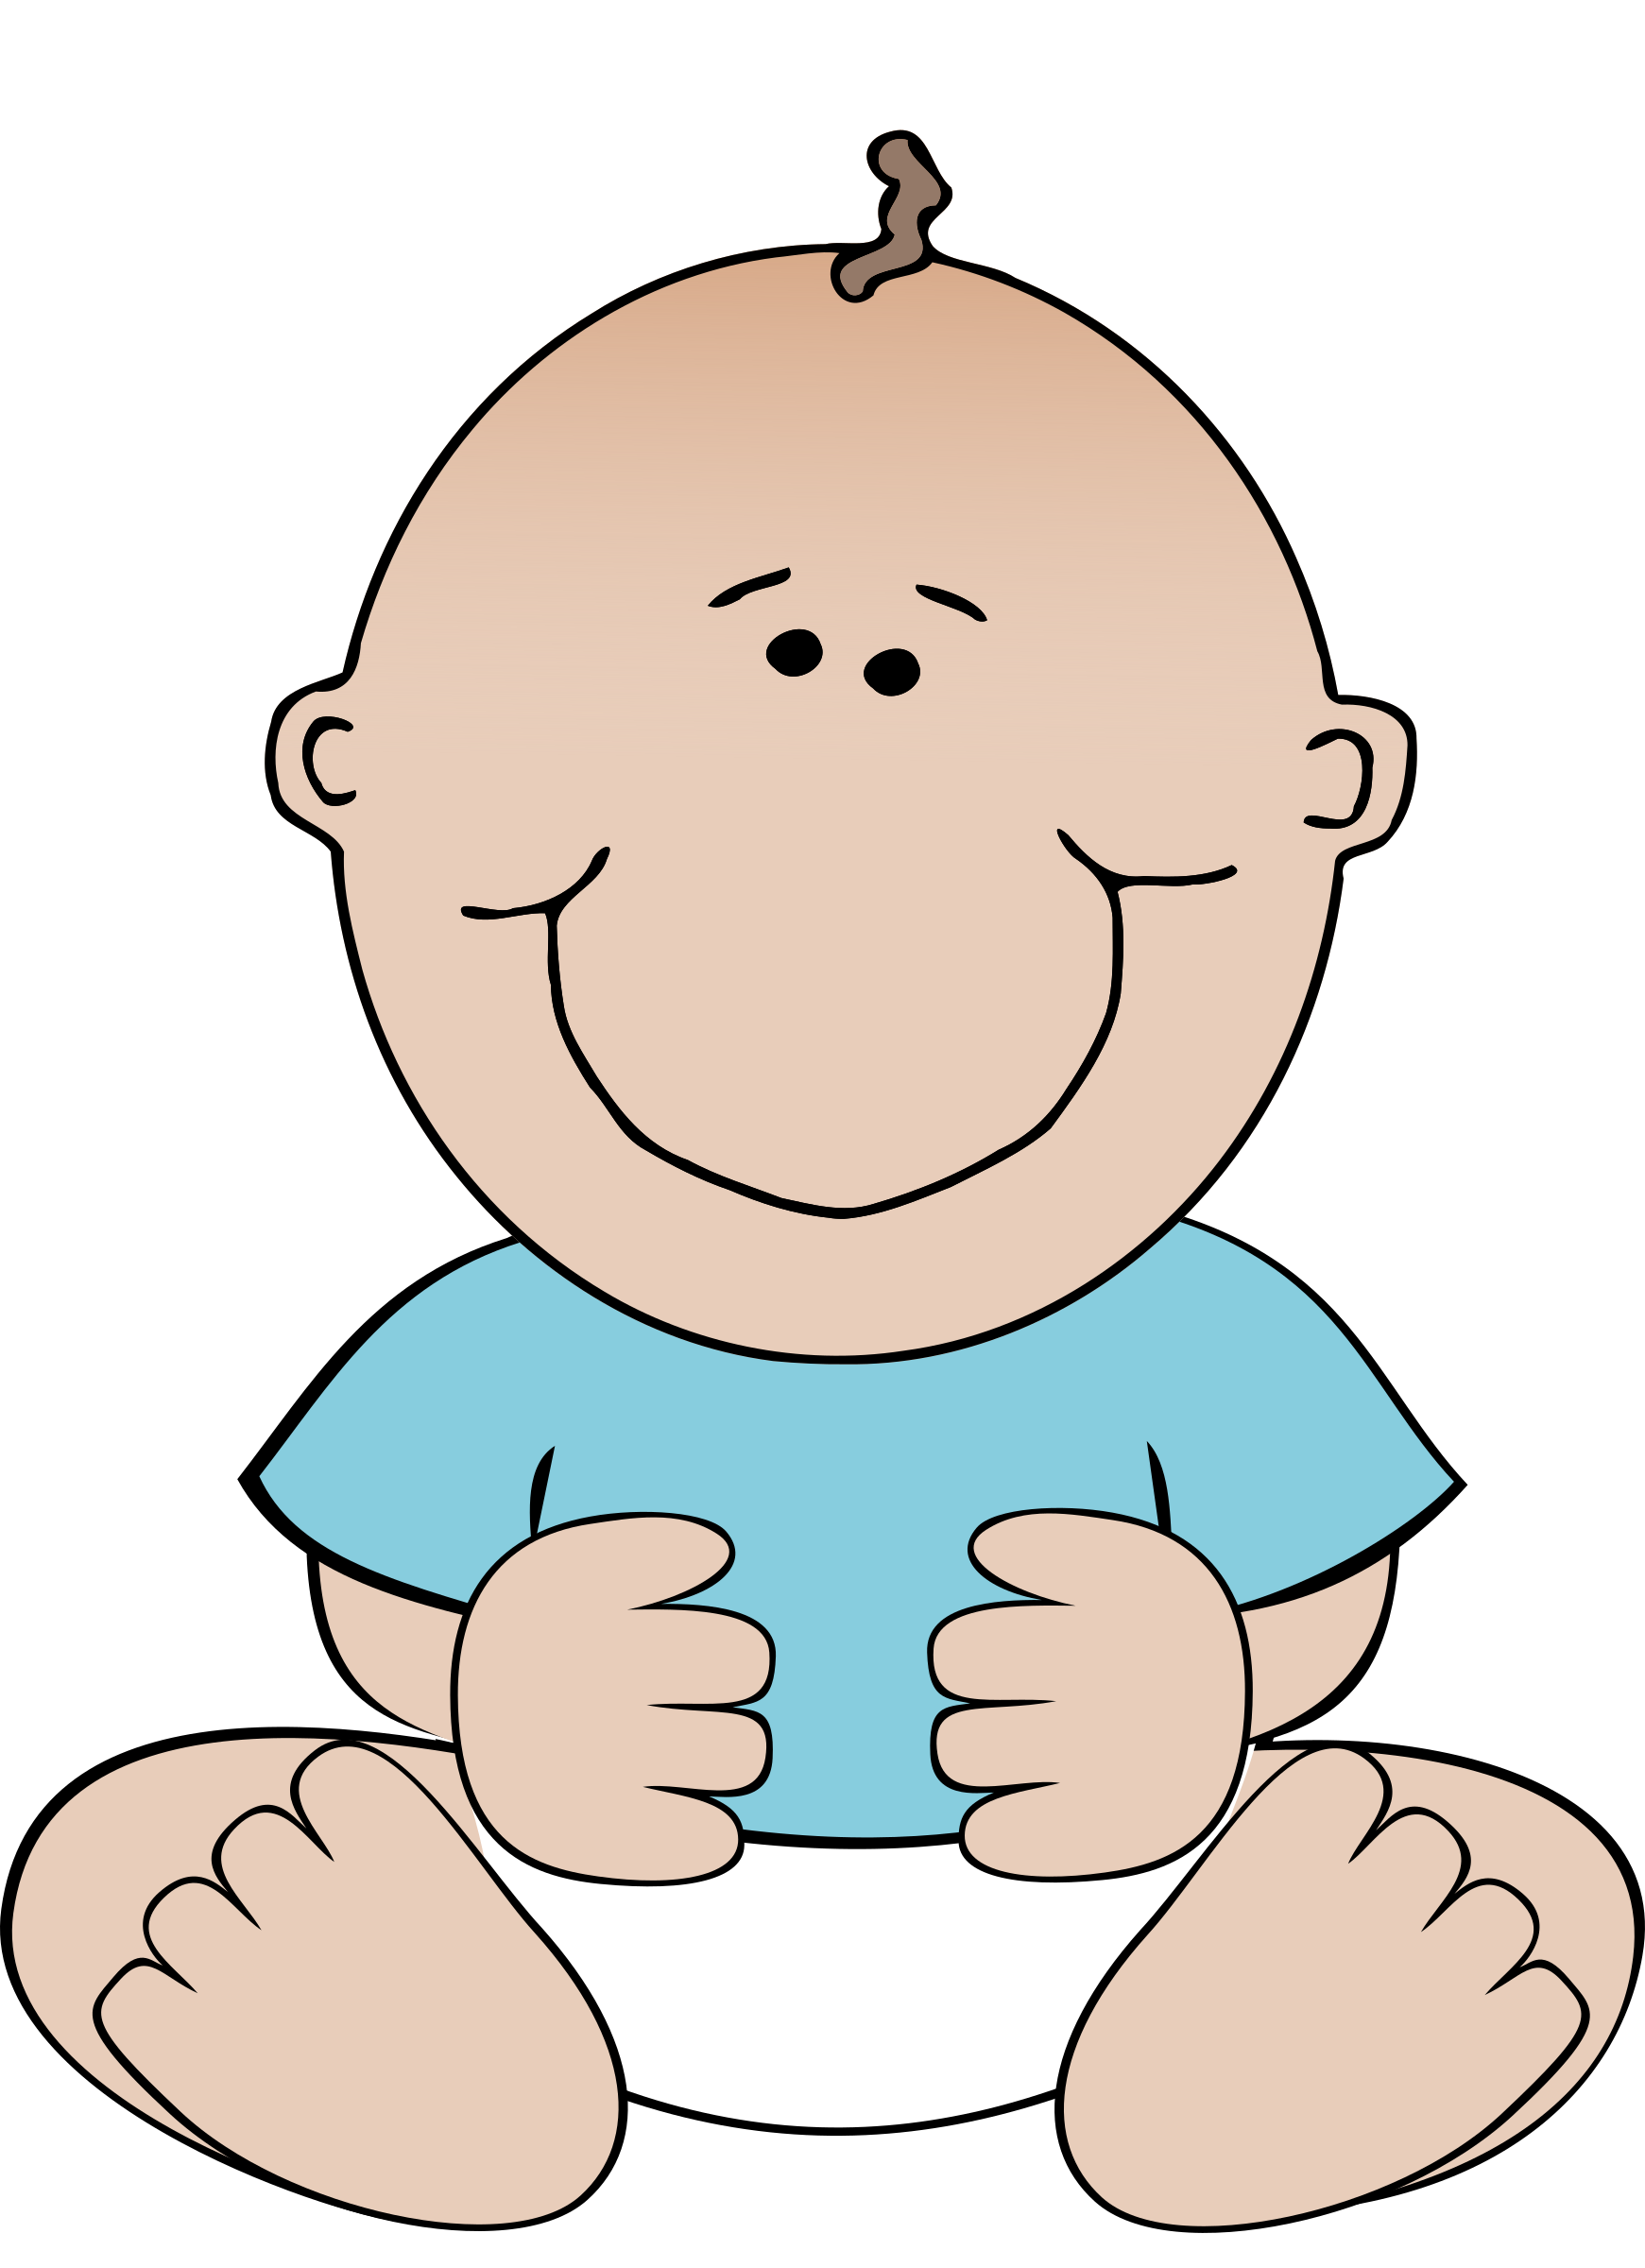 Baby Boy Sitting Vector Clipart image Free stock photo Public Domain photo CC0 Images